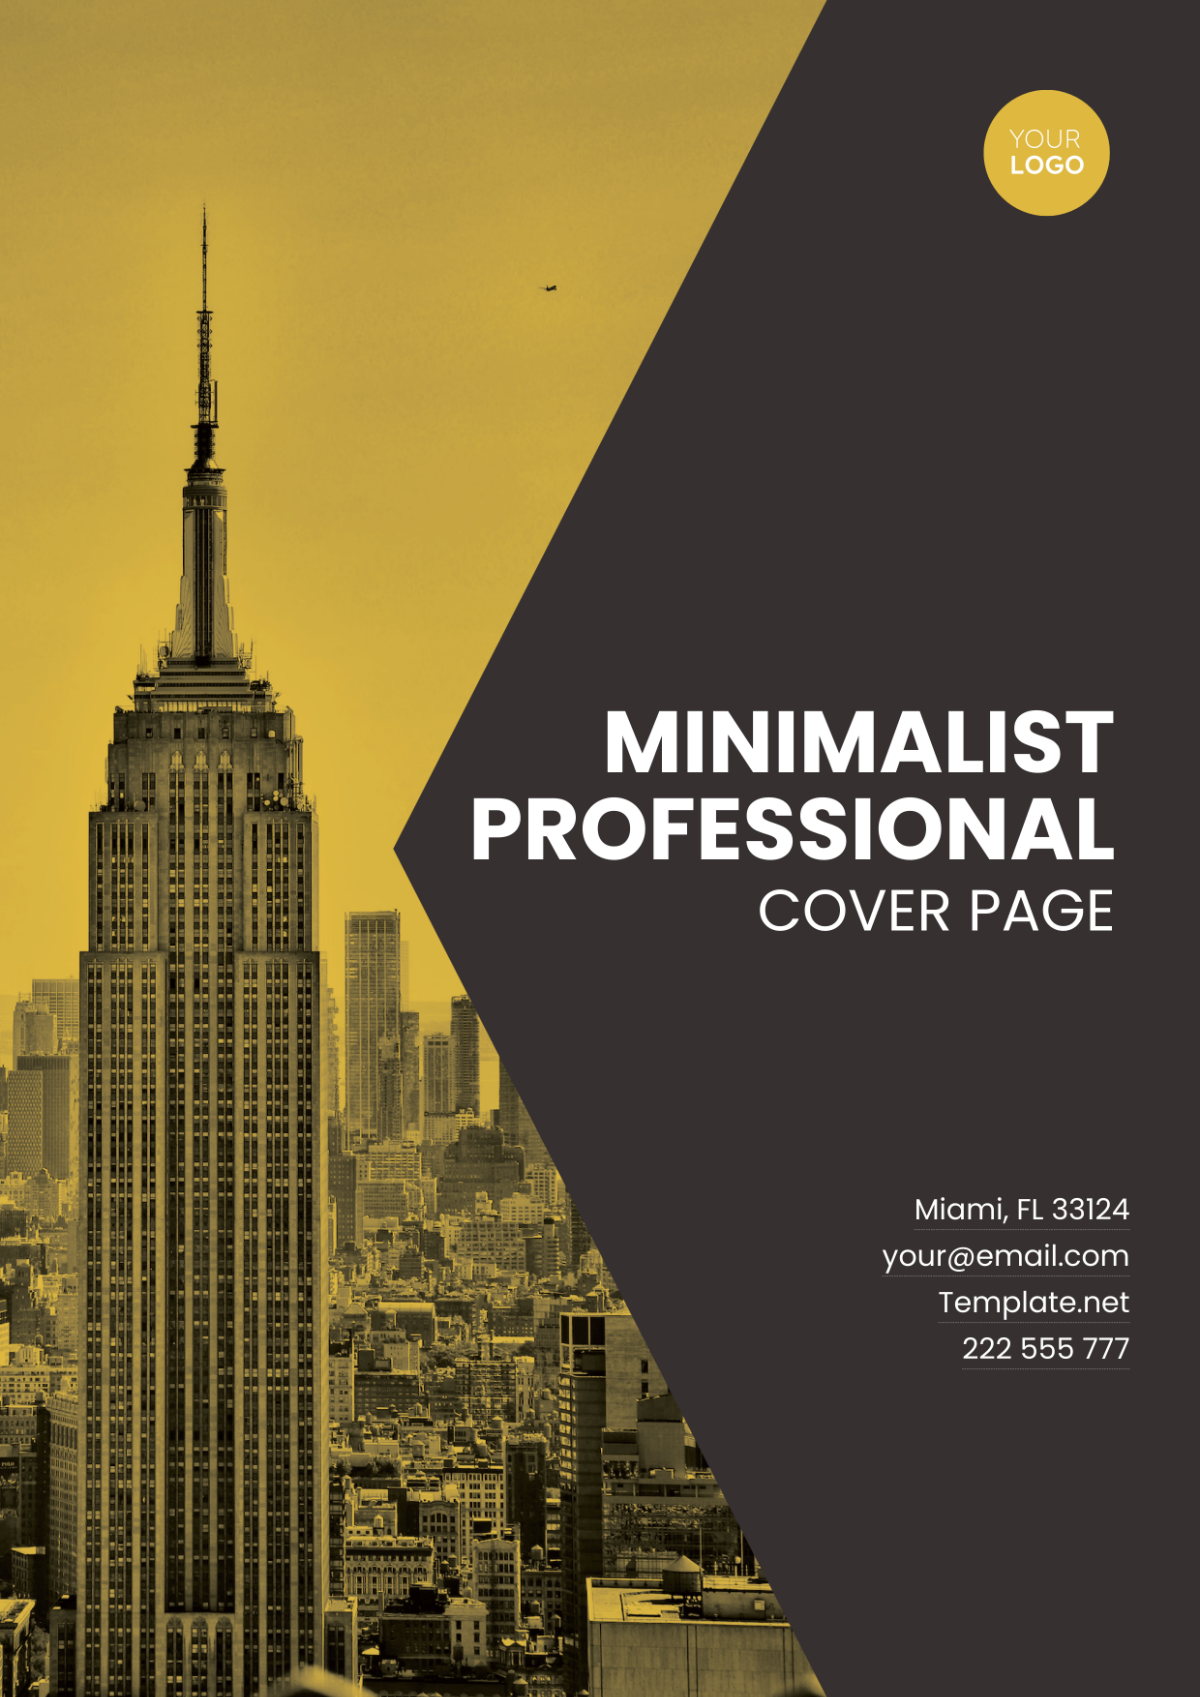 Minimalist Professional Cover Page Template